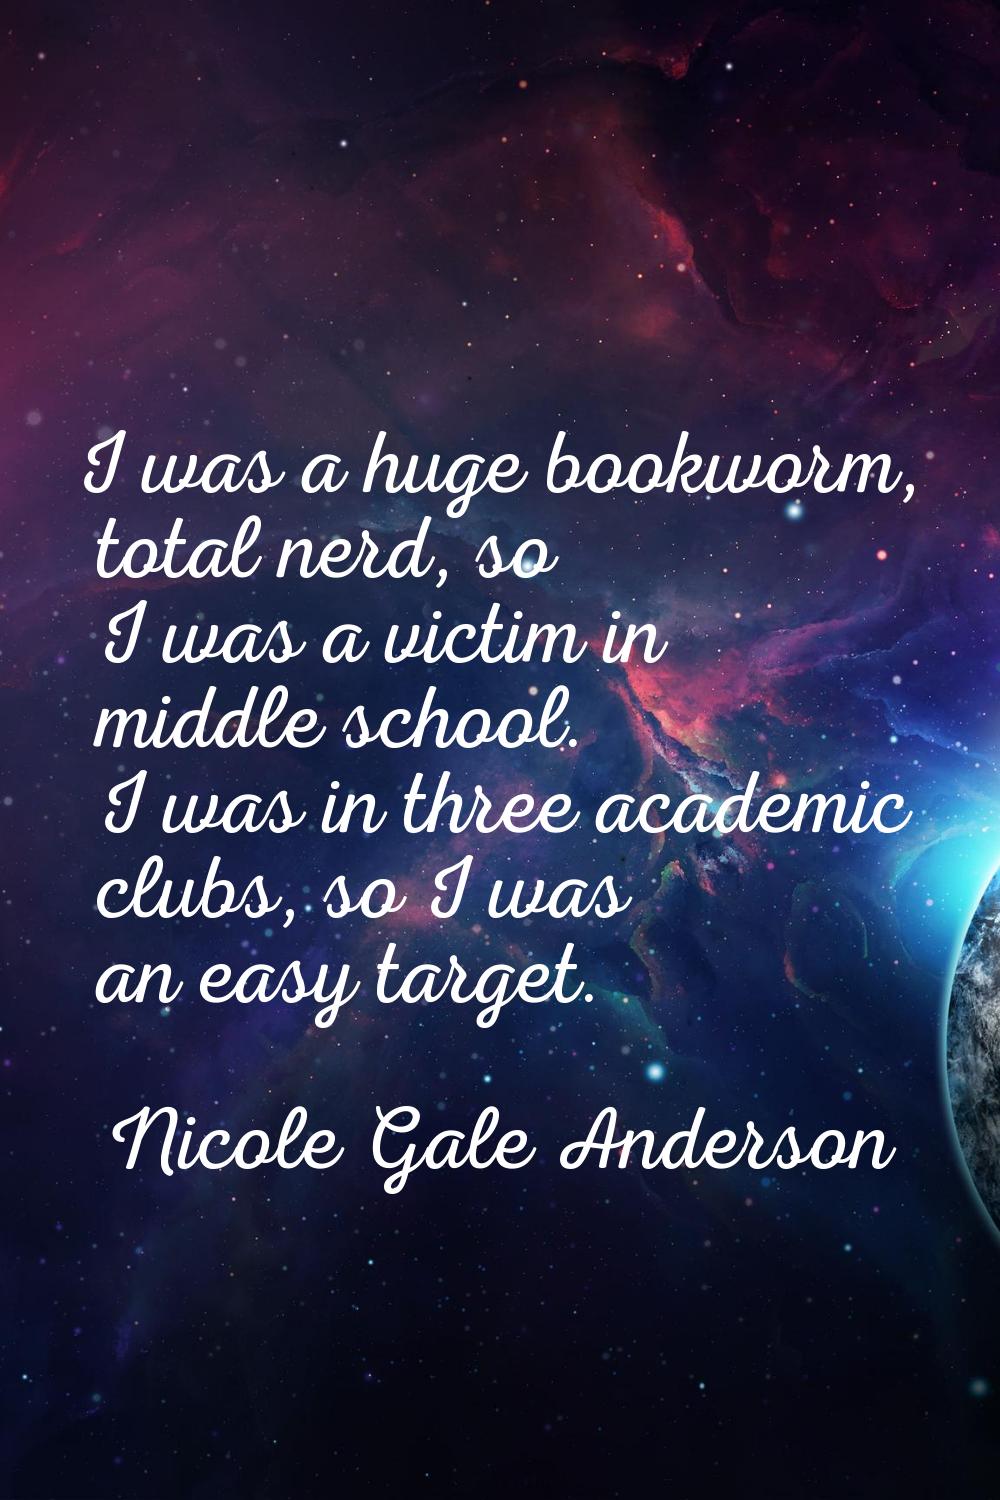 I was a huge bookworm, total nerd, so I was a victim in middle school. I was in three academic club